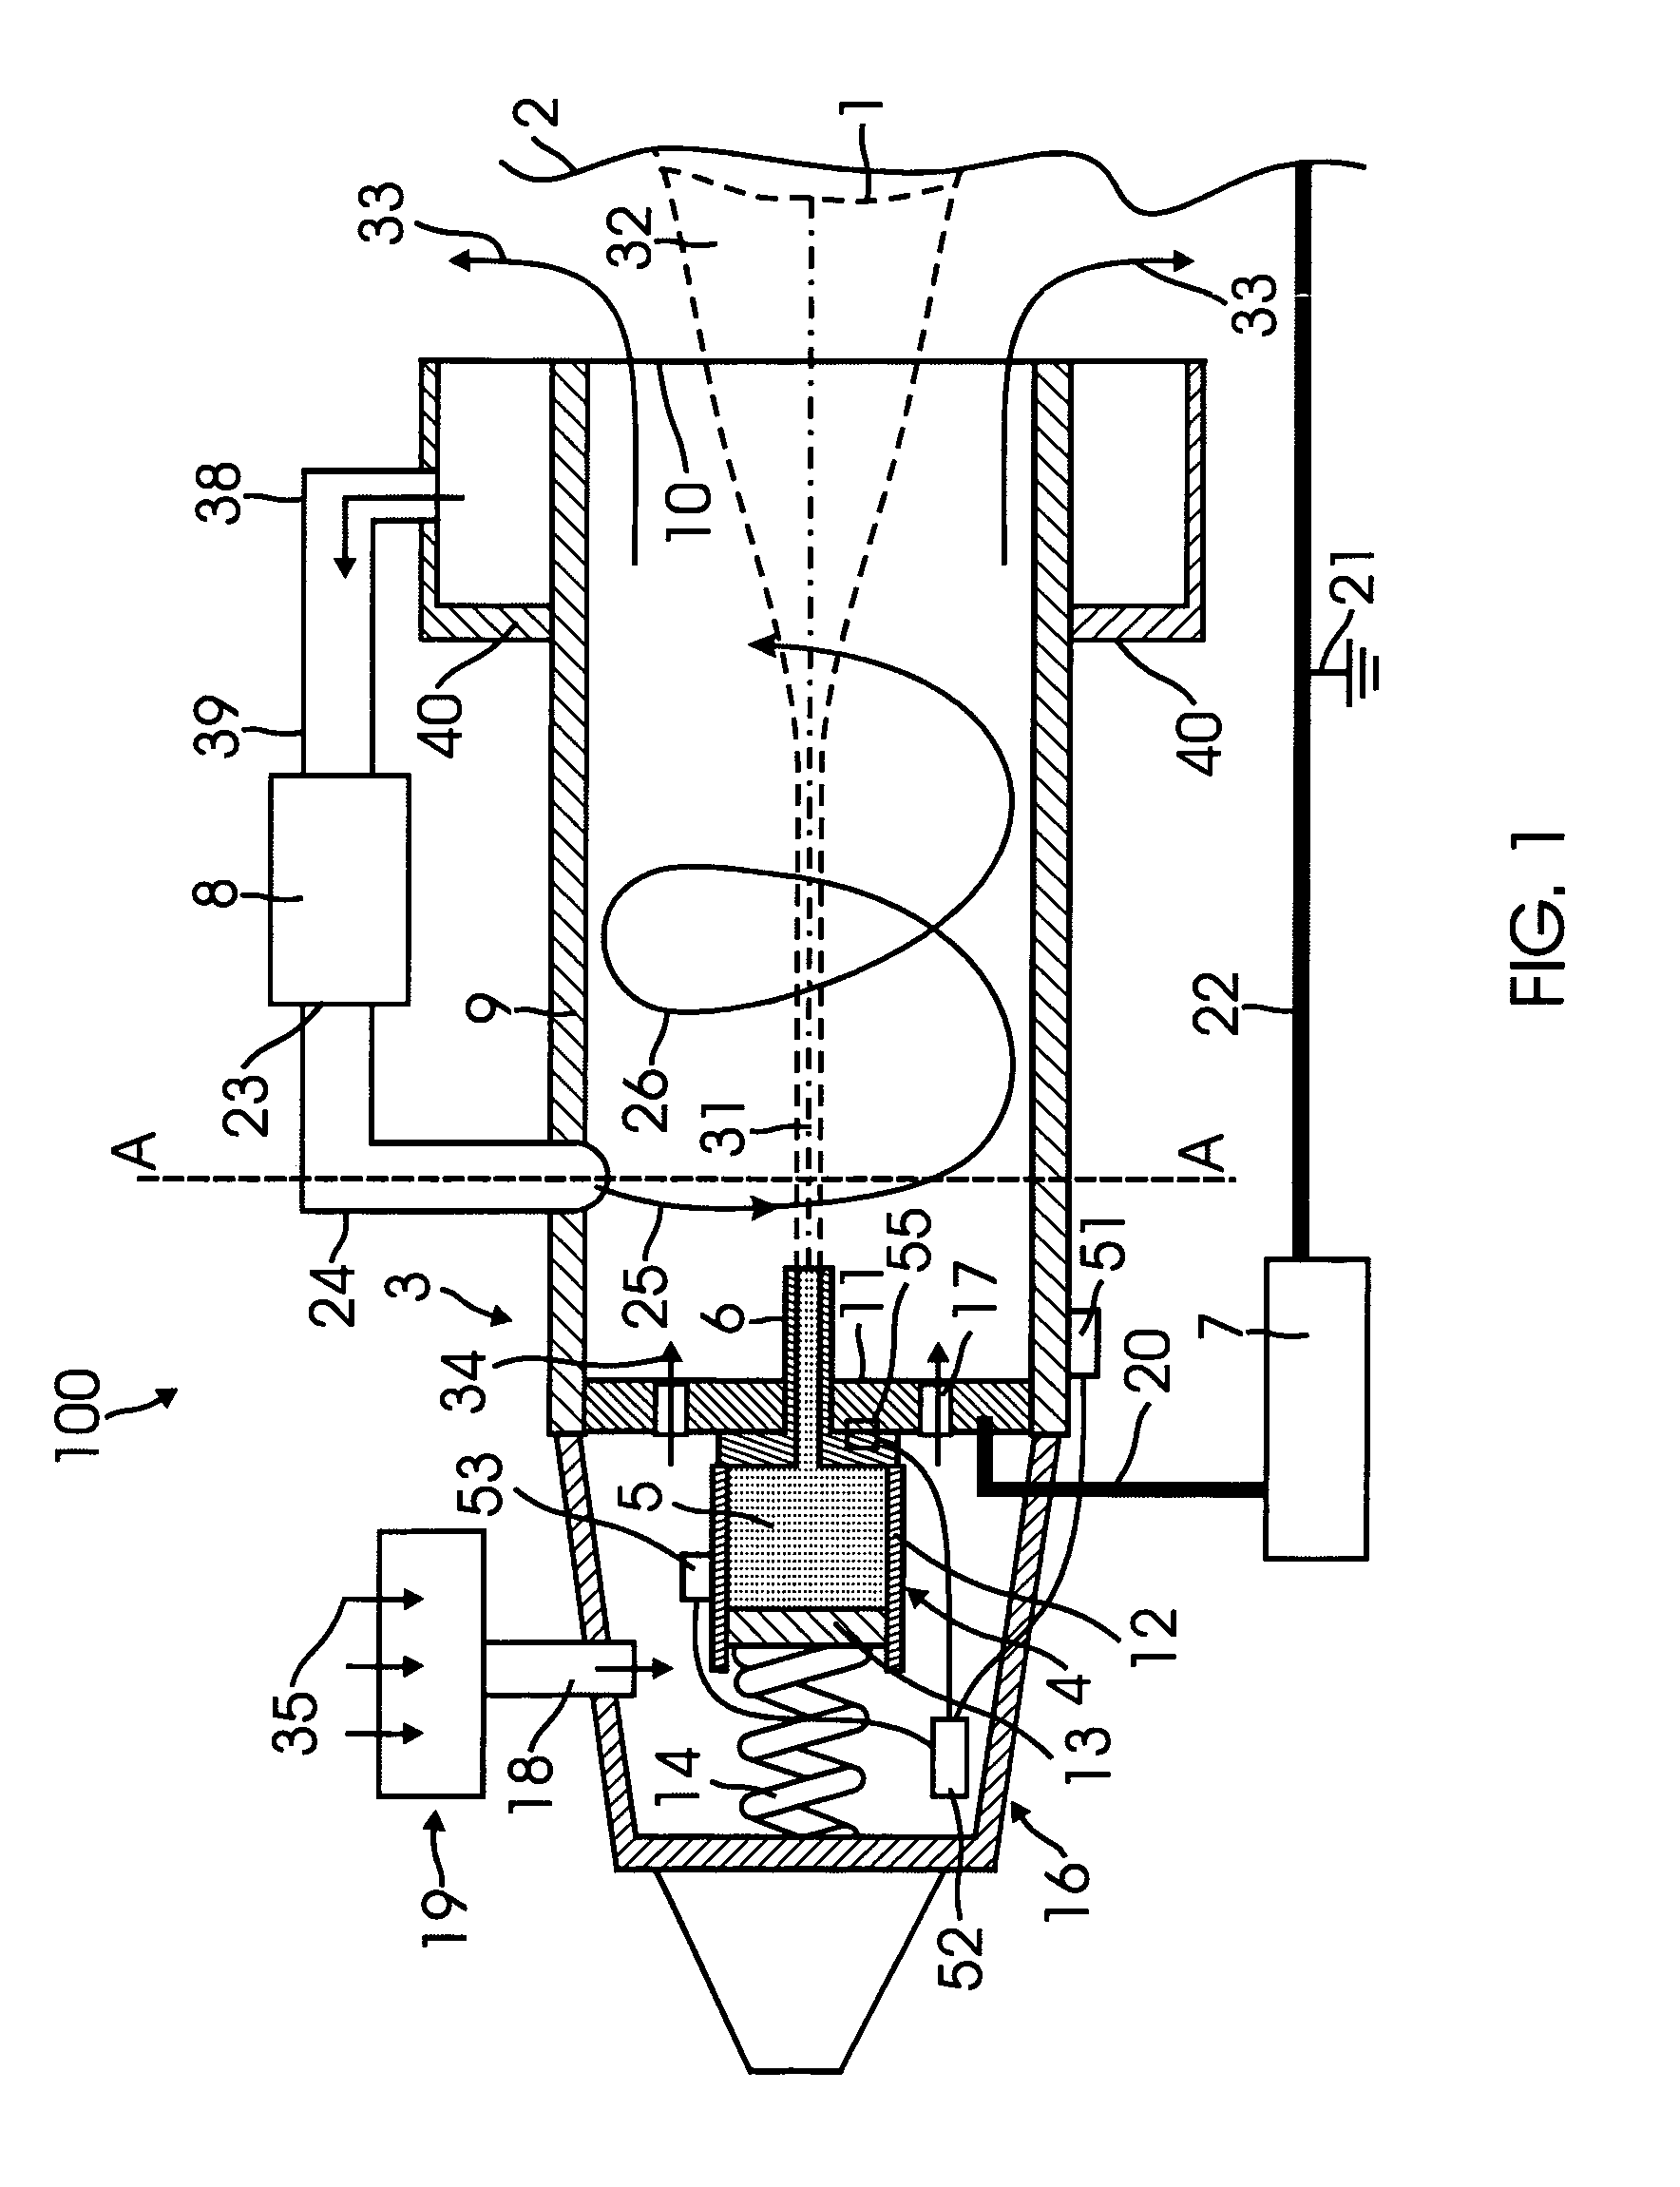 Apparatus for forming a microfiber coating